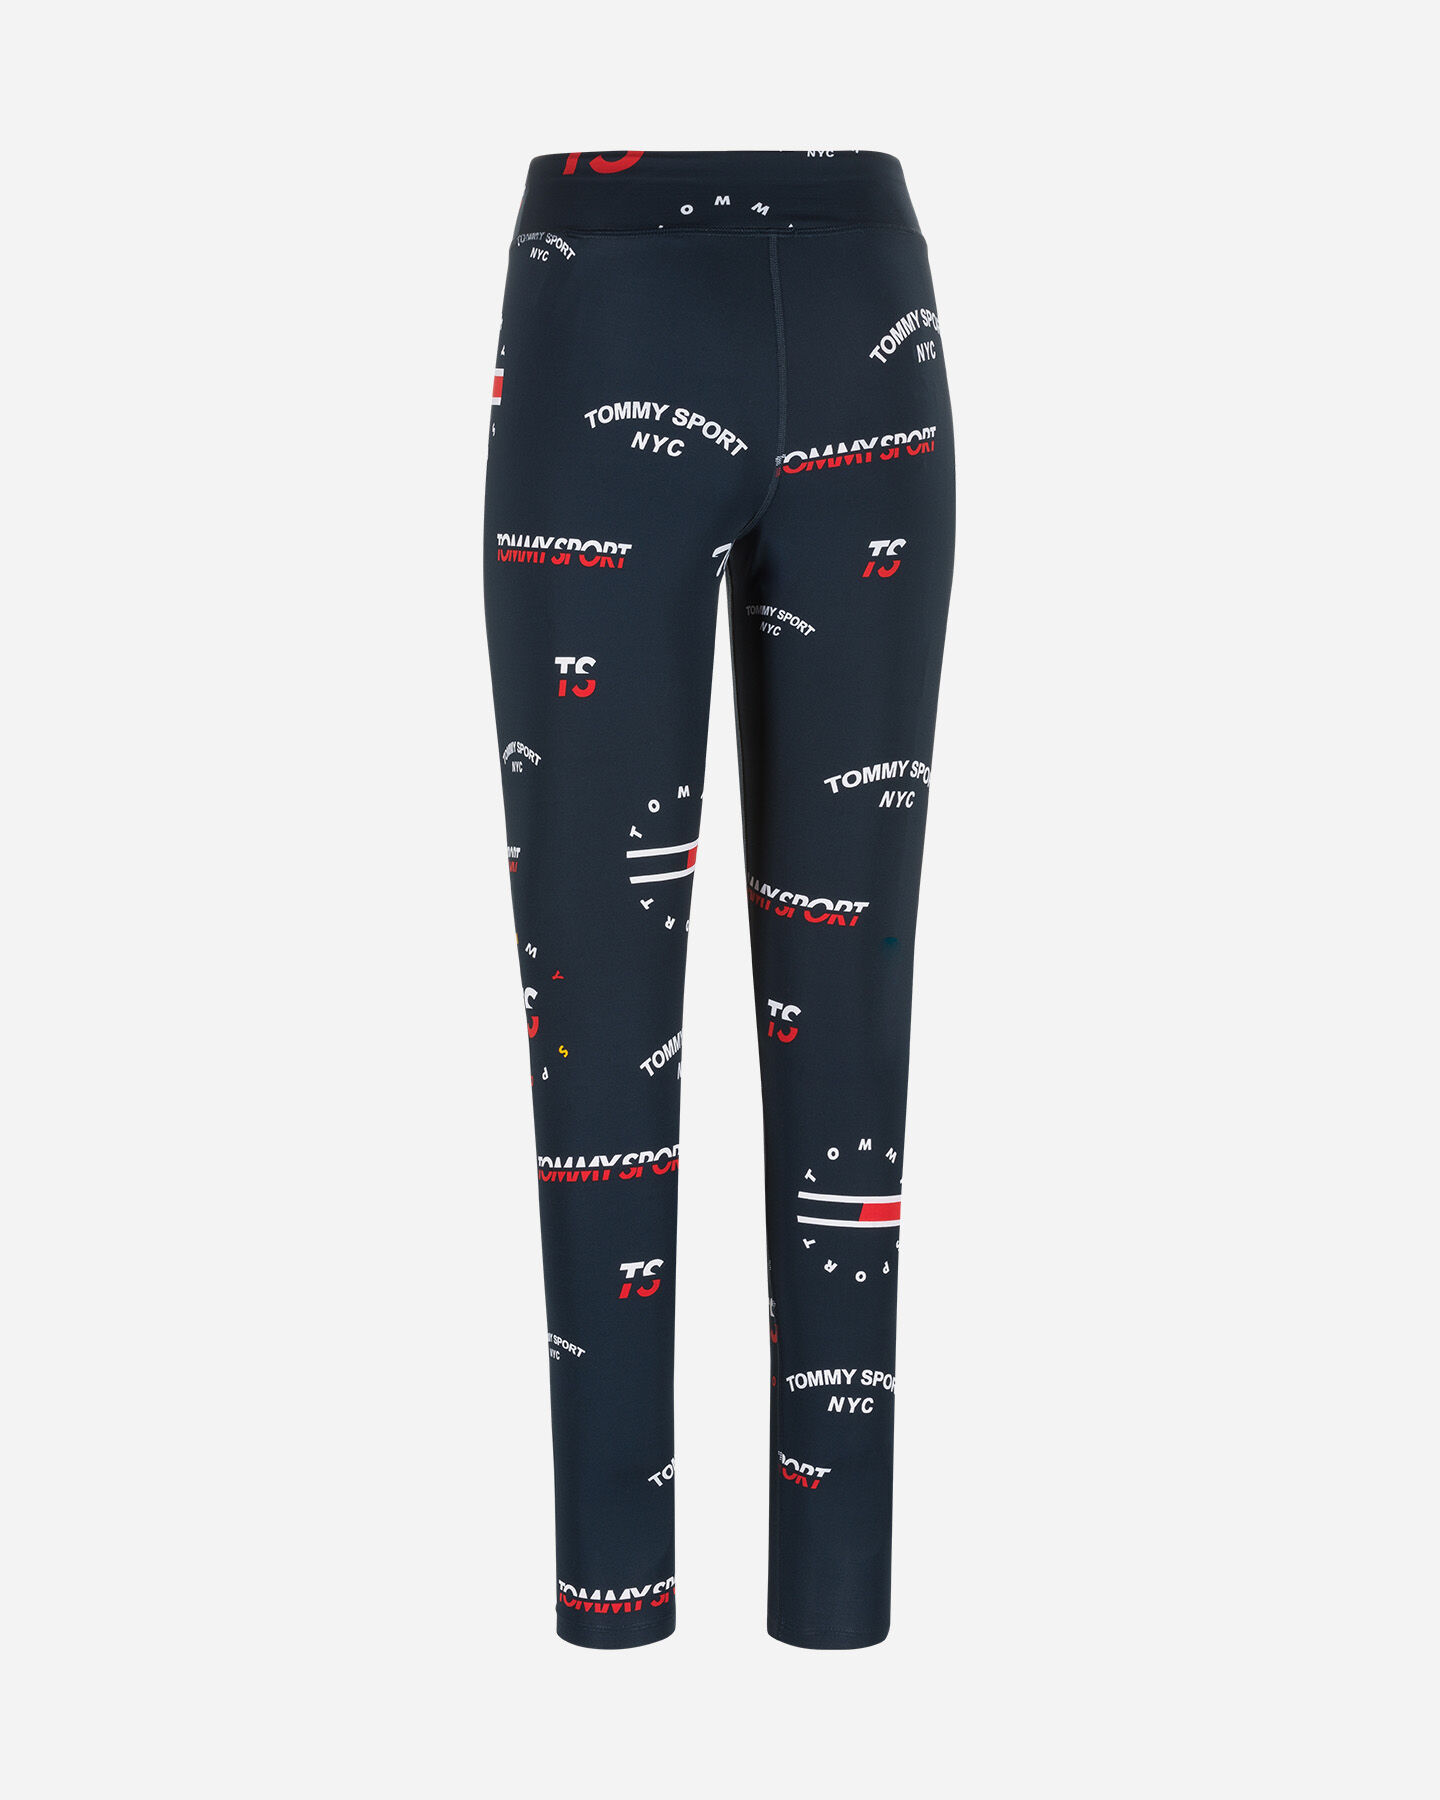  Leggings TOMMY HILFIGER GRAPHICS W S4073276|401|XS scatto 1